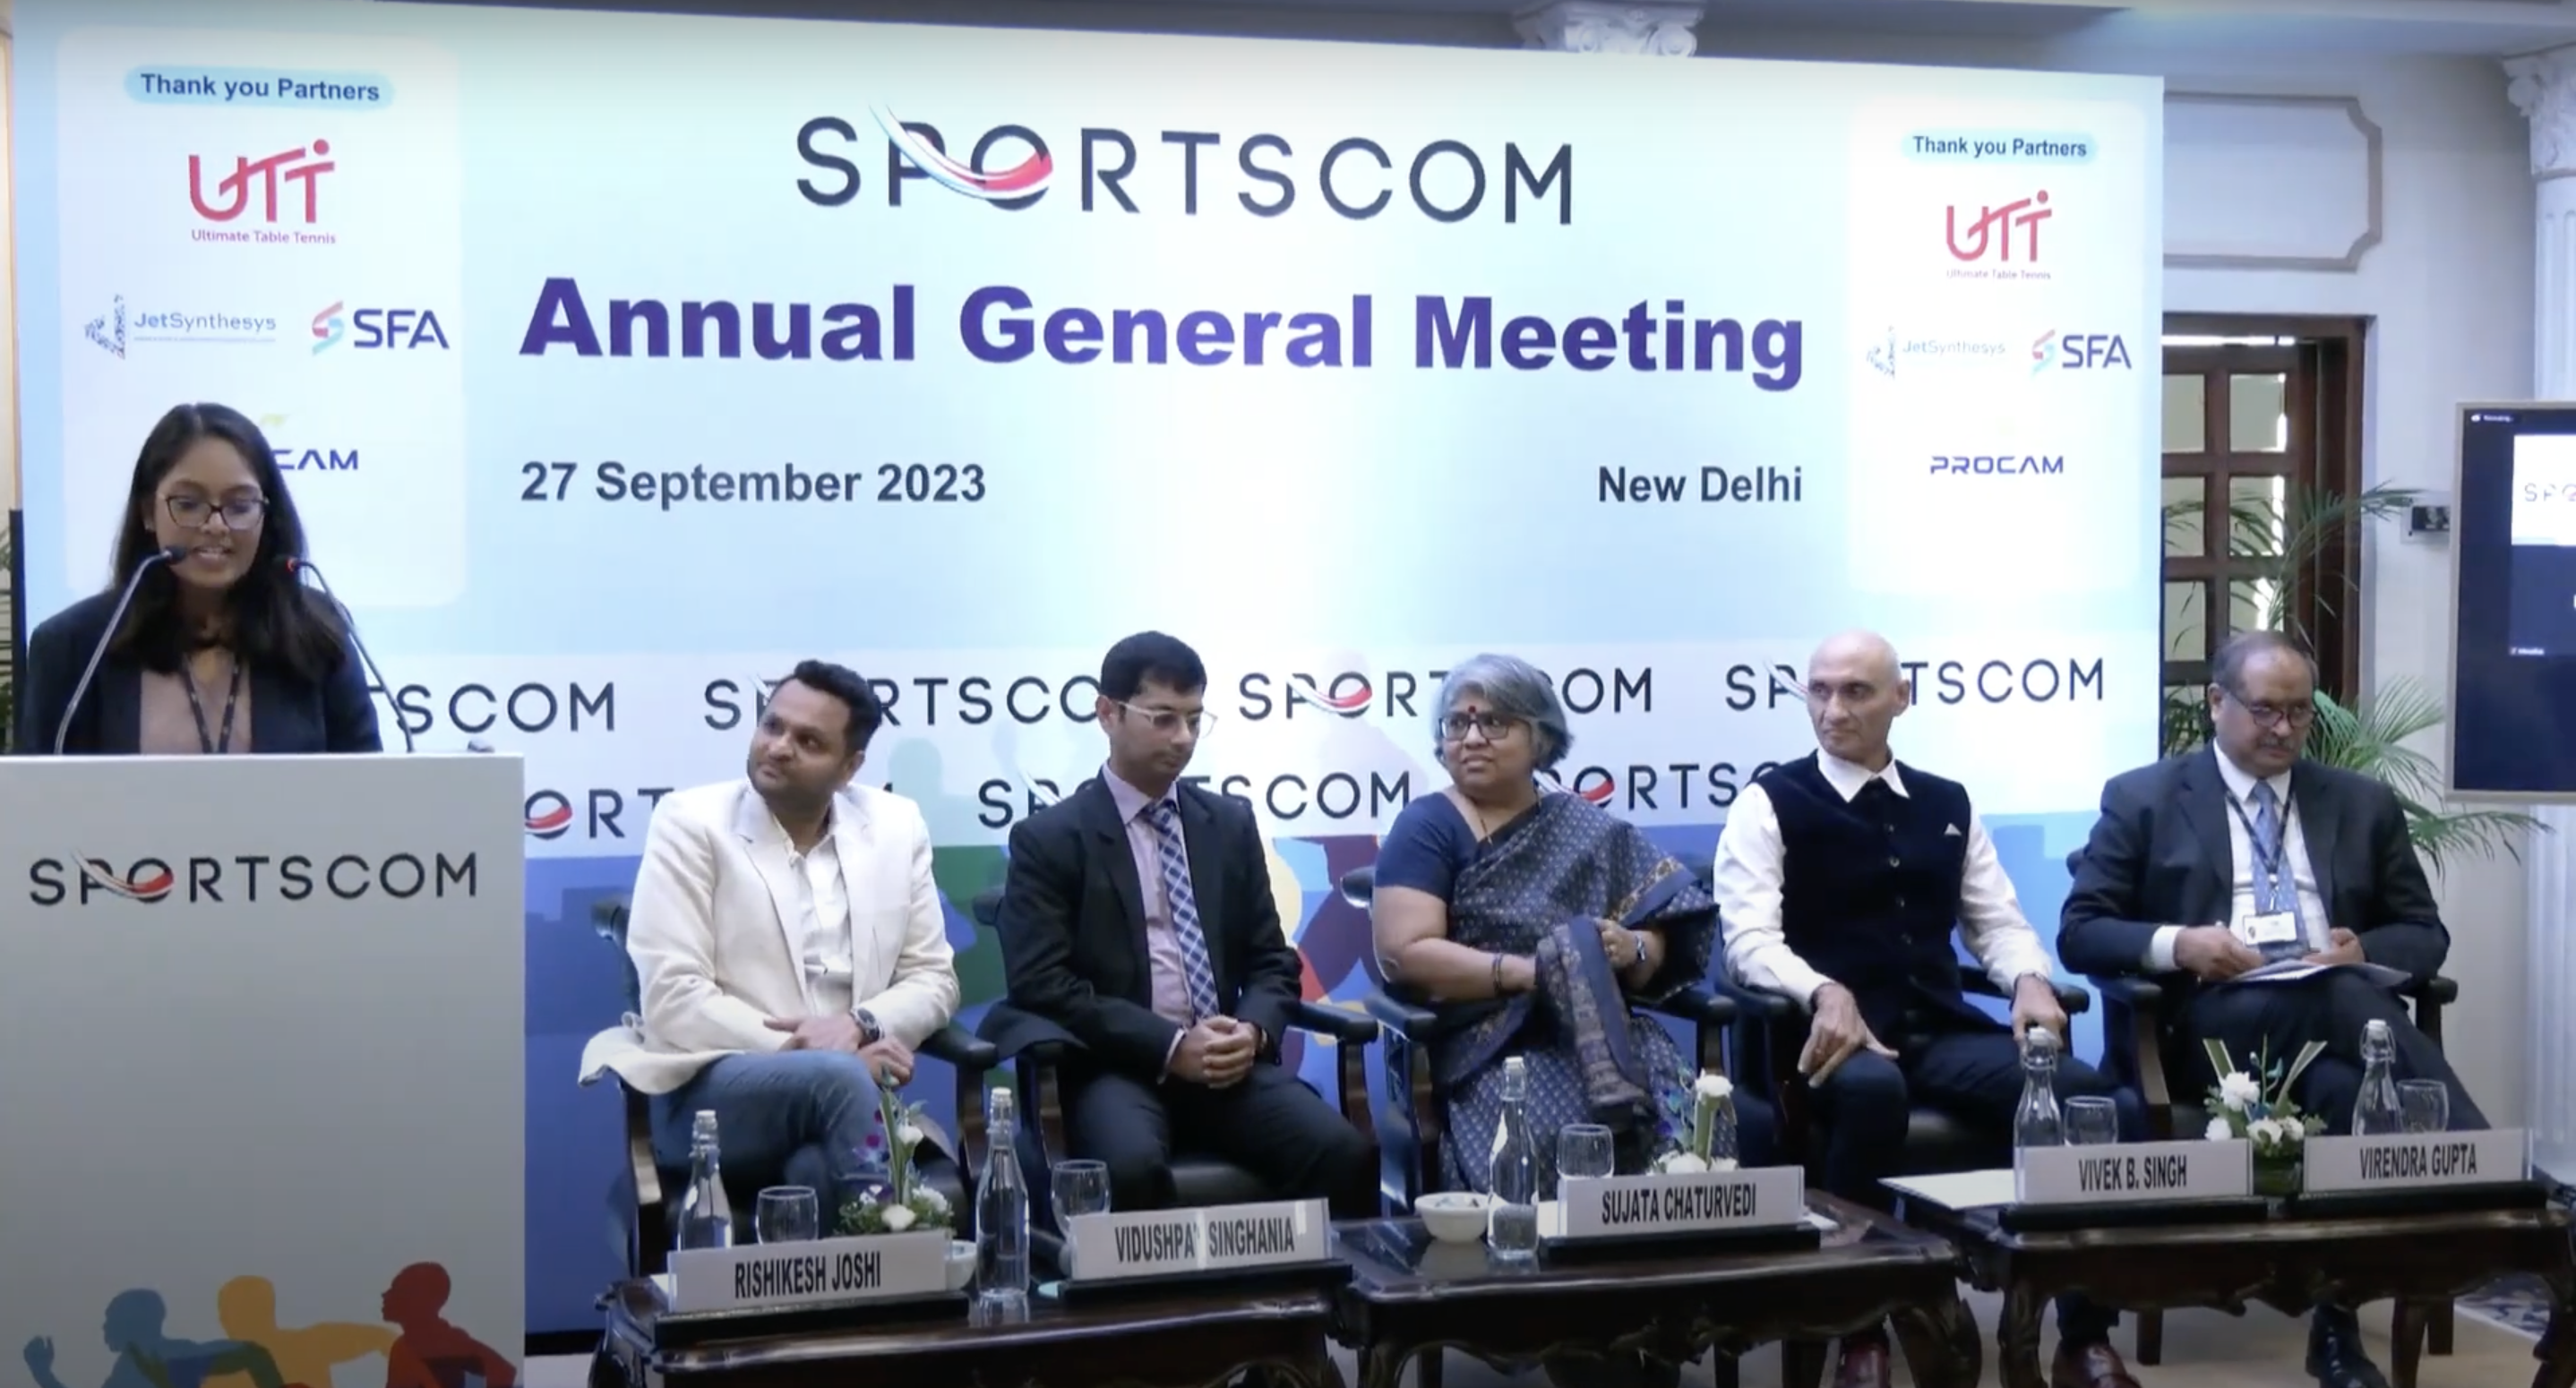 5th Annual General Meeting of SPORTSCOM Industry Confederation - Inaugural Address by our Chief Guest Smt. Sujata Chaturvedi, Secretary Ministry of Youth Affairs and Sports, Government of India.